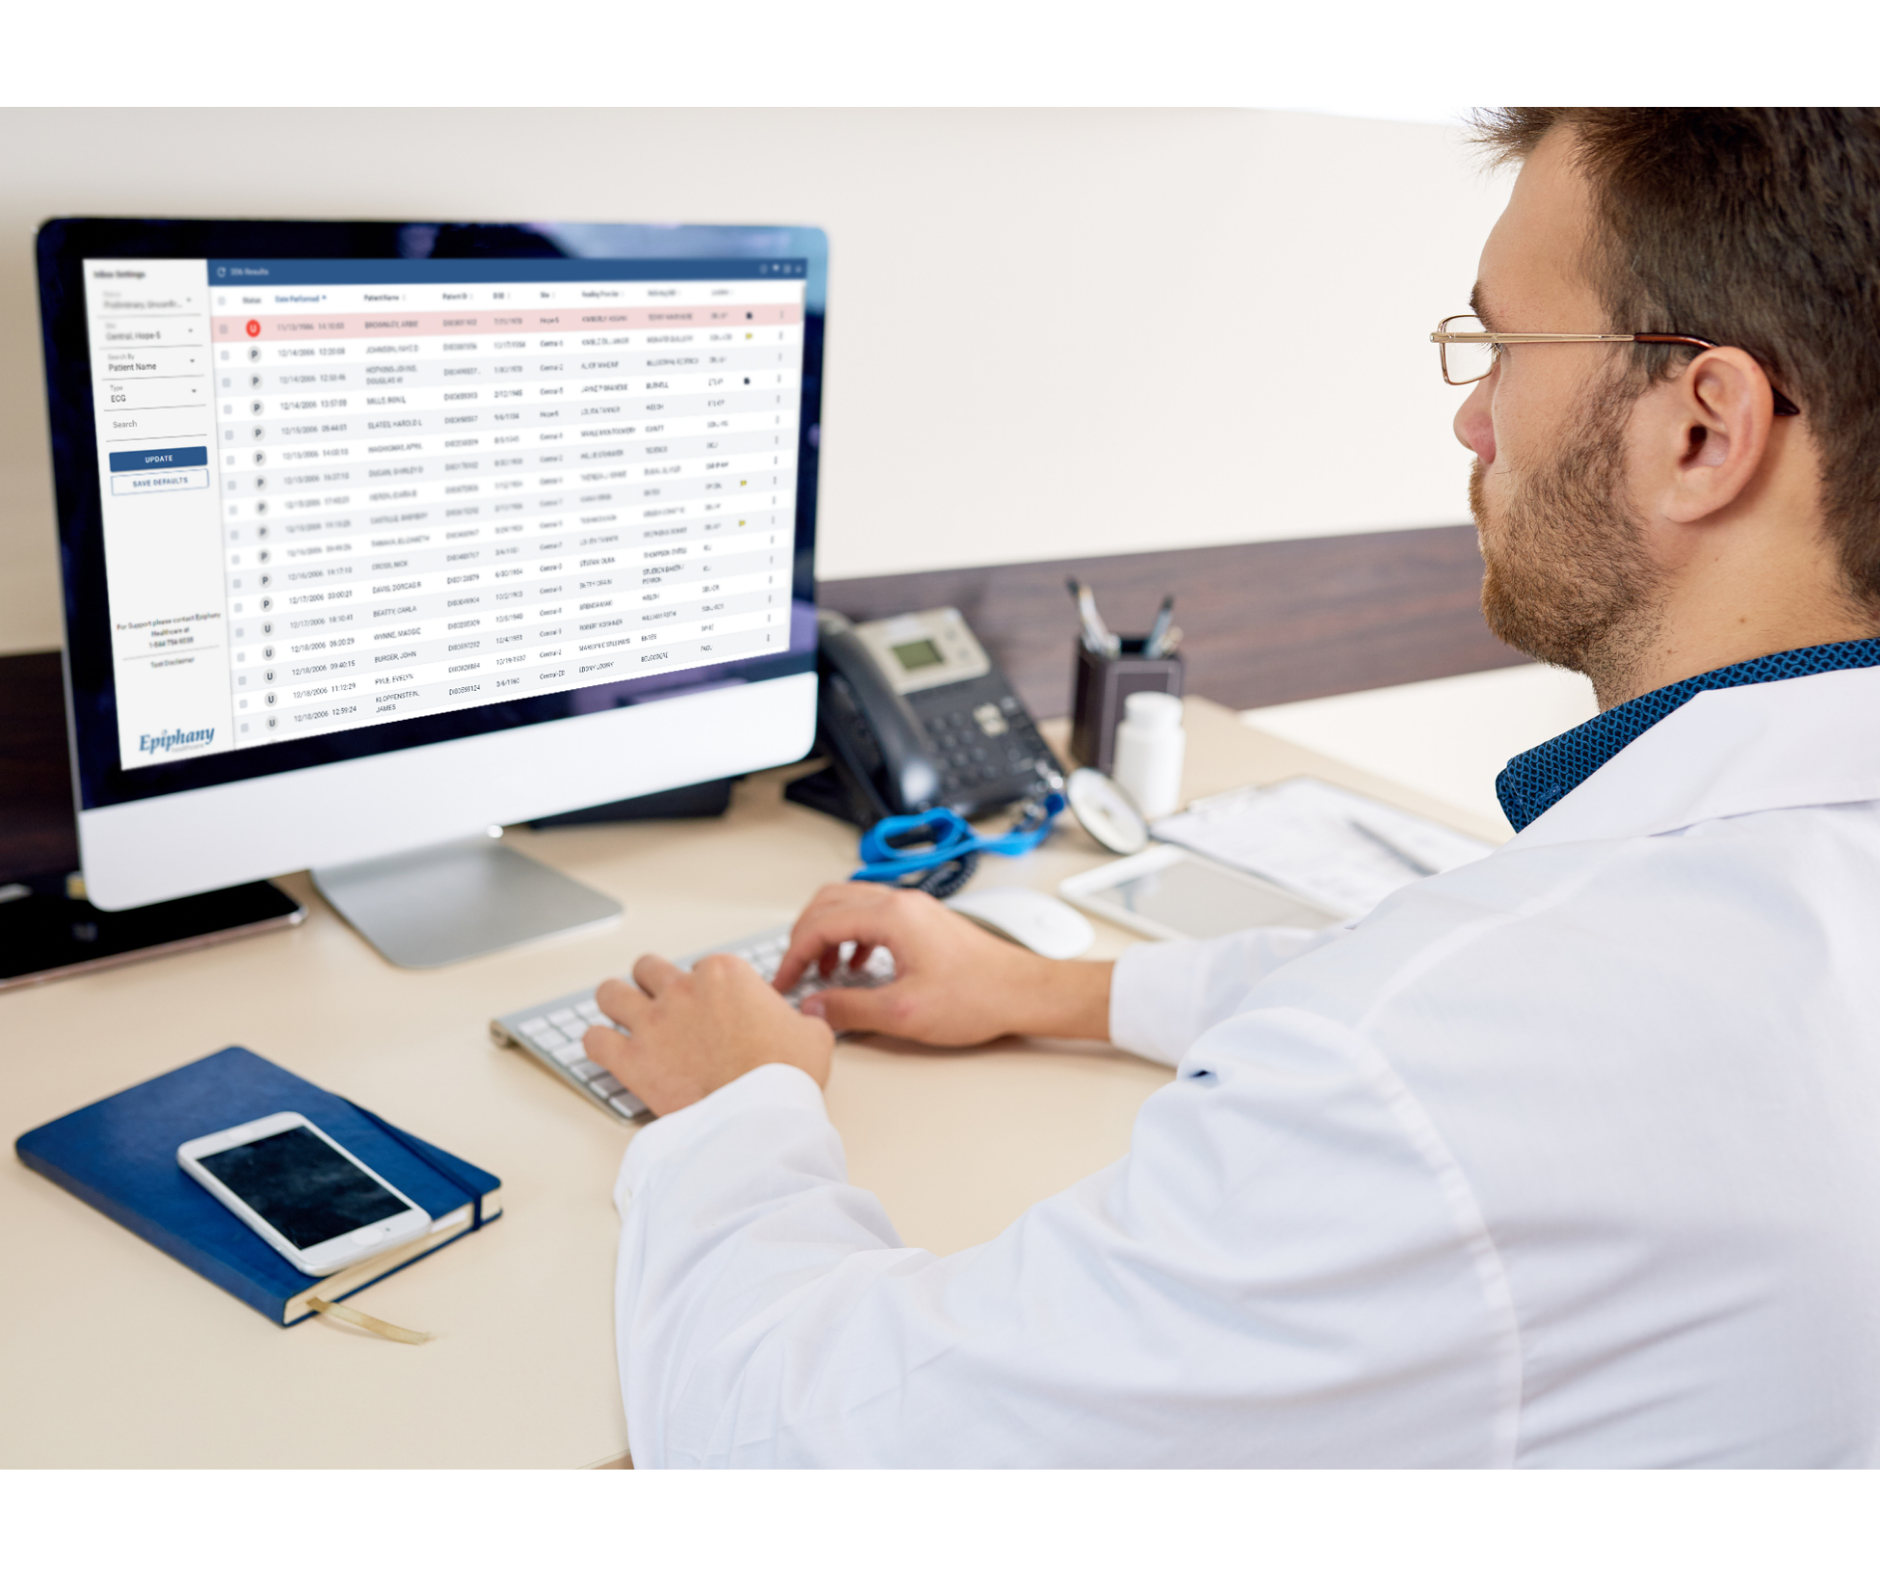 Cardiology Techs and Supervisors: Simplify Your ECG Management Workflow